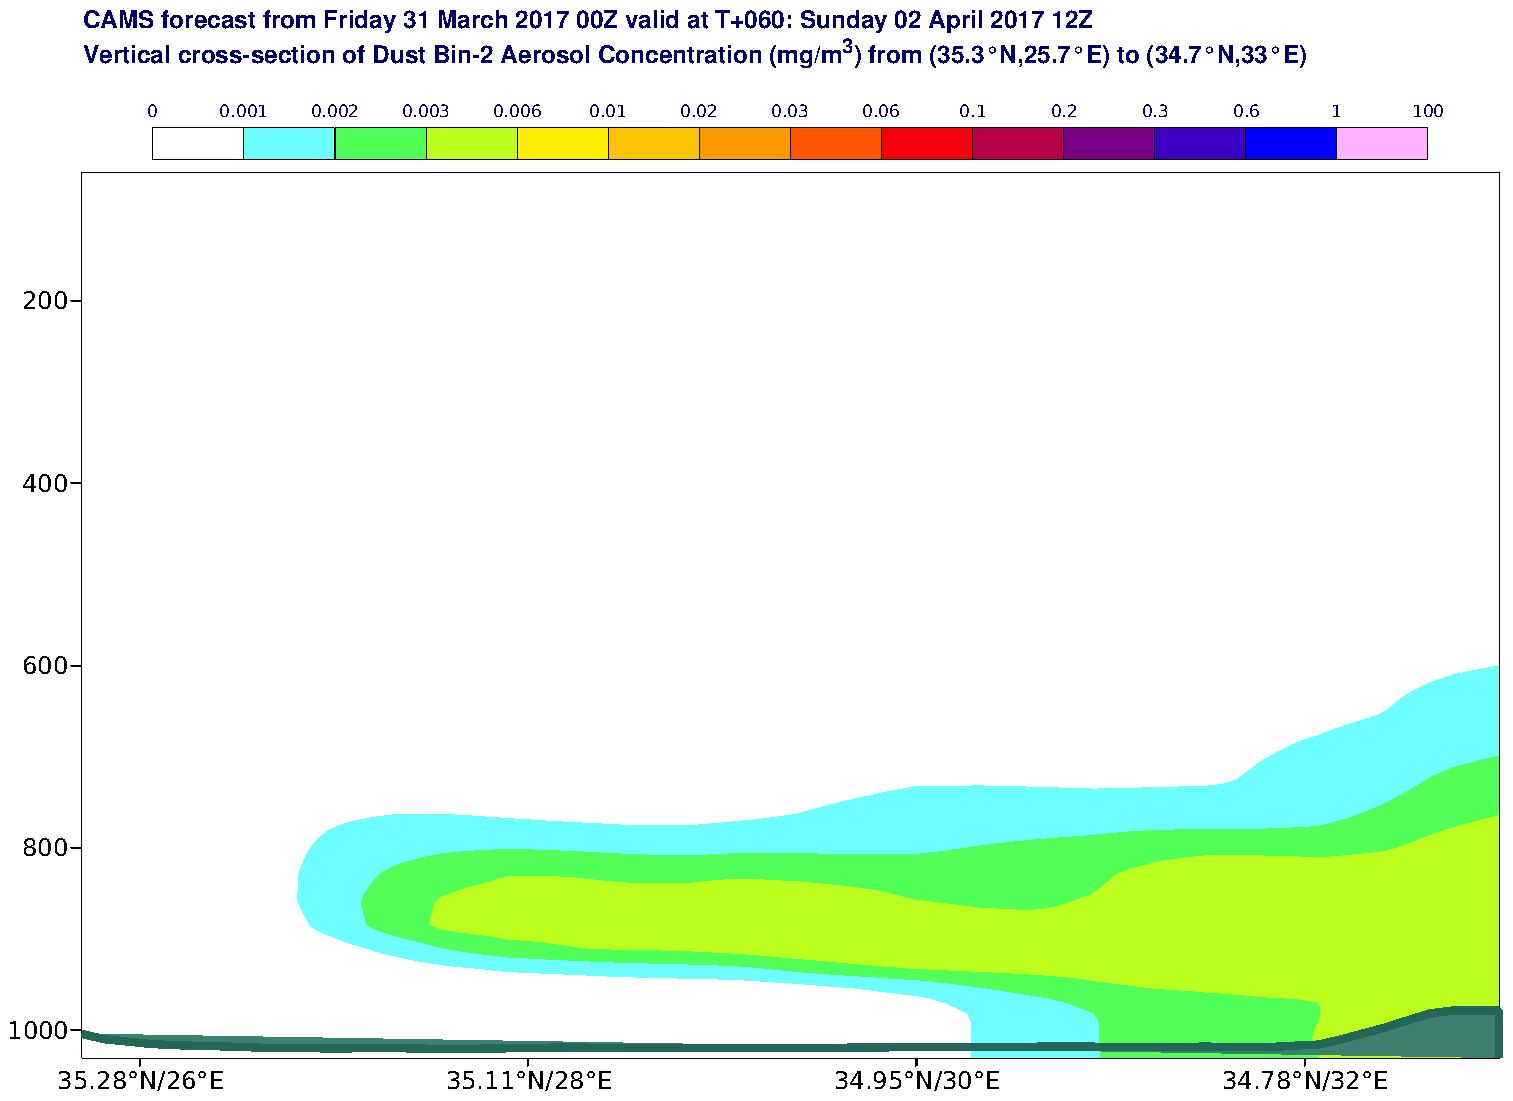 Vertical cross-section of Dust Bin-2 Aerosol Concentration (mg/m3) valid at T60 - 2017-04-02 12:00